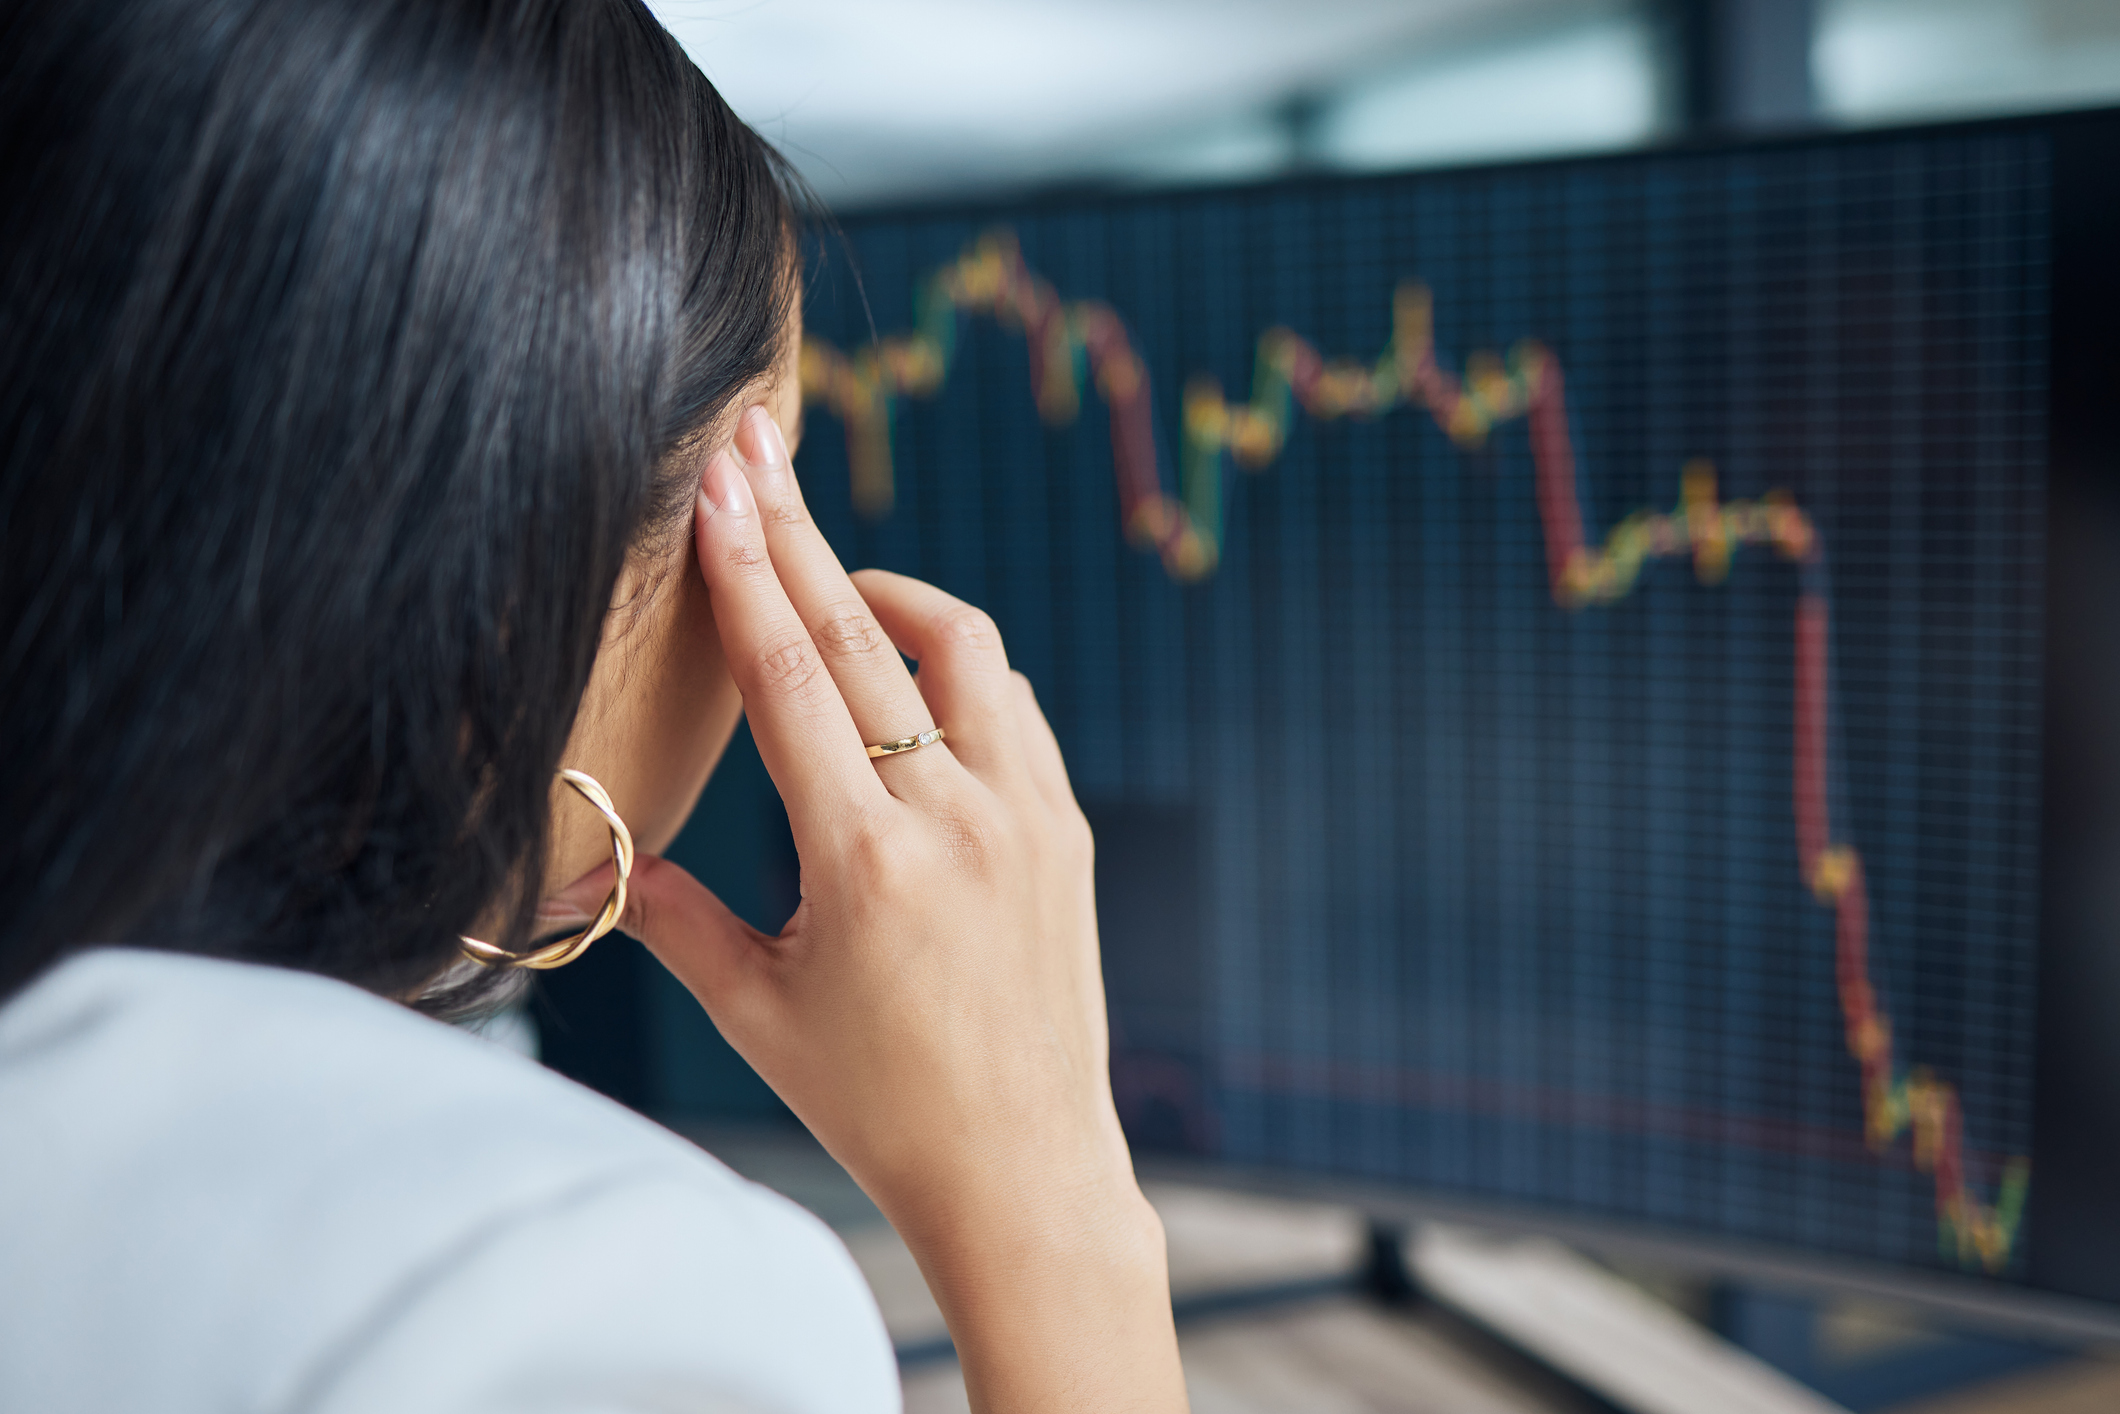 A stressed woman observes declining stock performance on a computer.